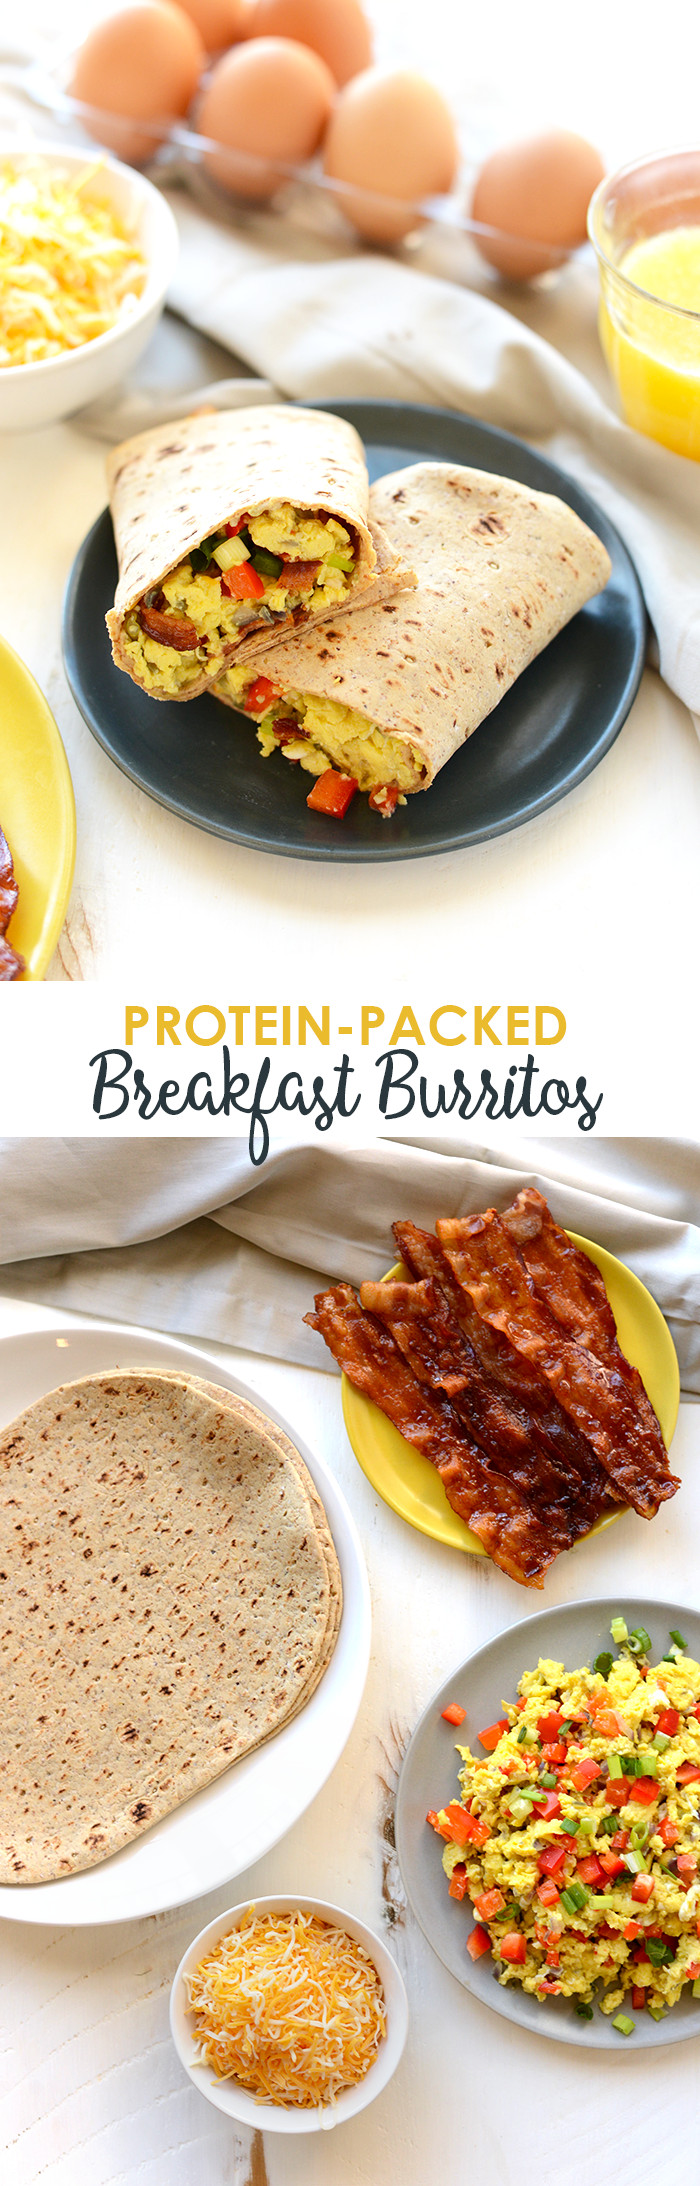 Healthy Breakfast Burrito Freezer
 This is meal prep at its finest Make these delicious